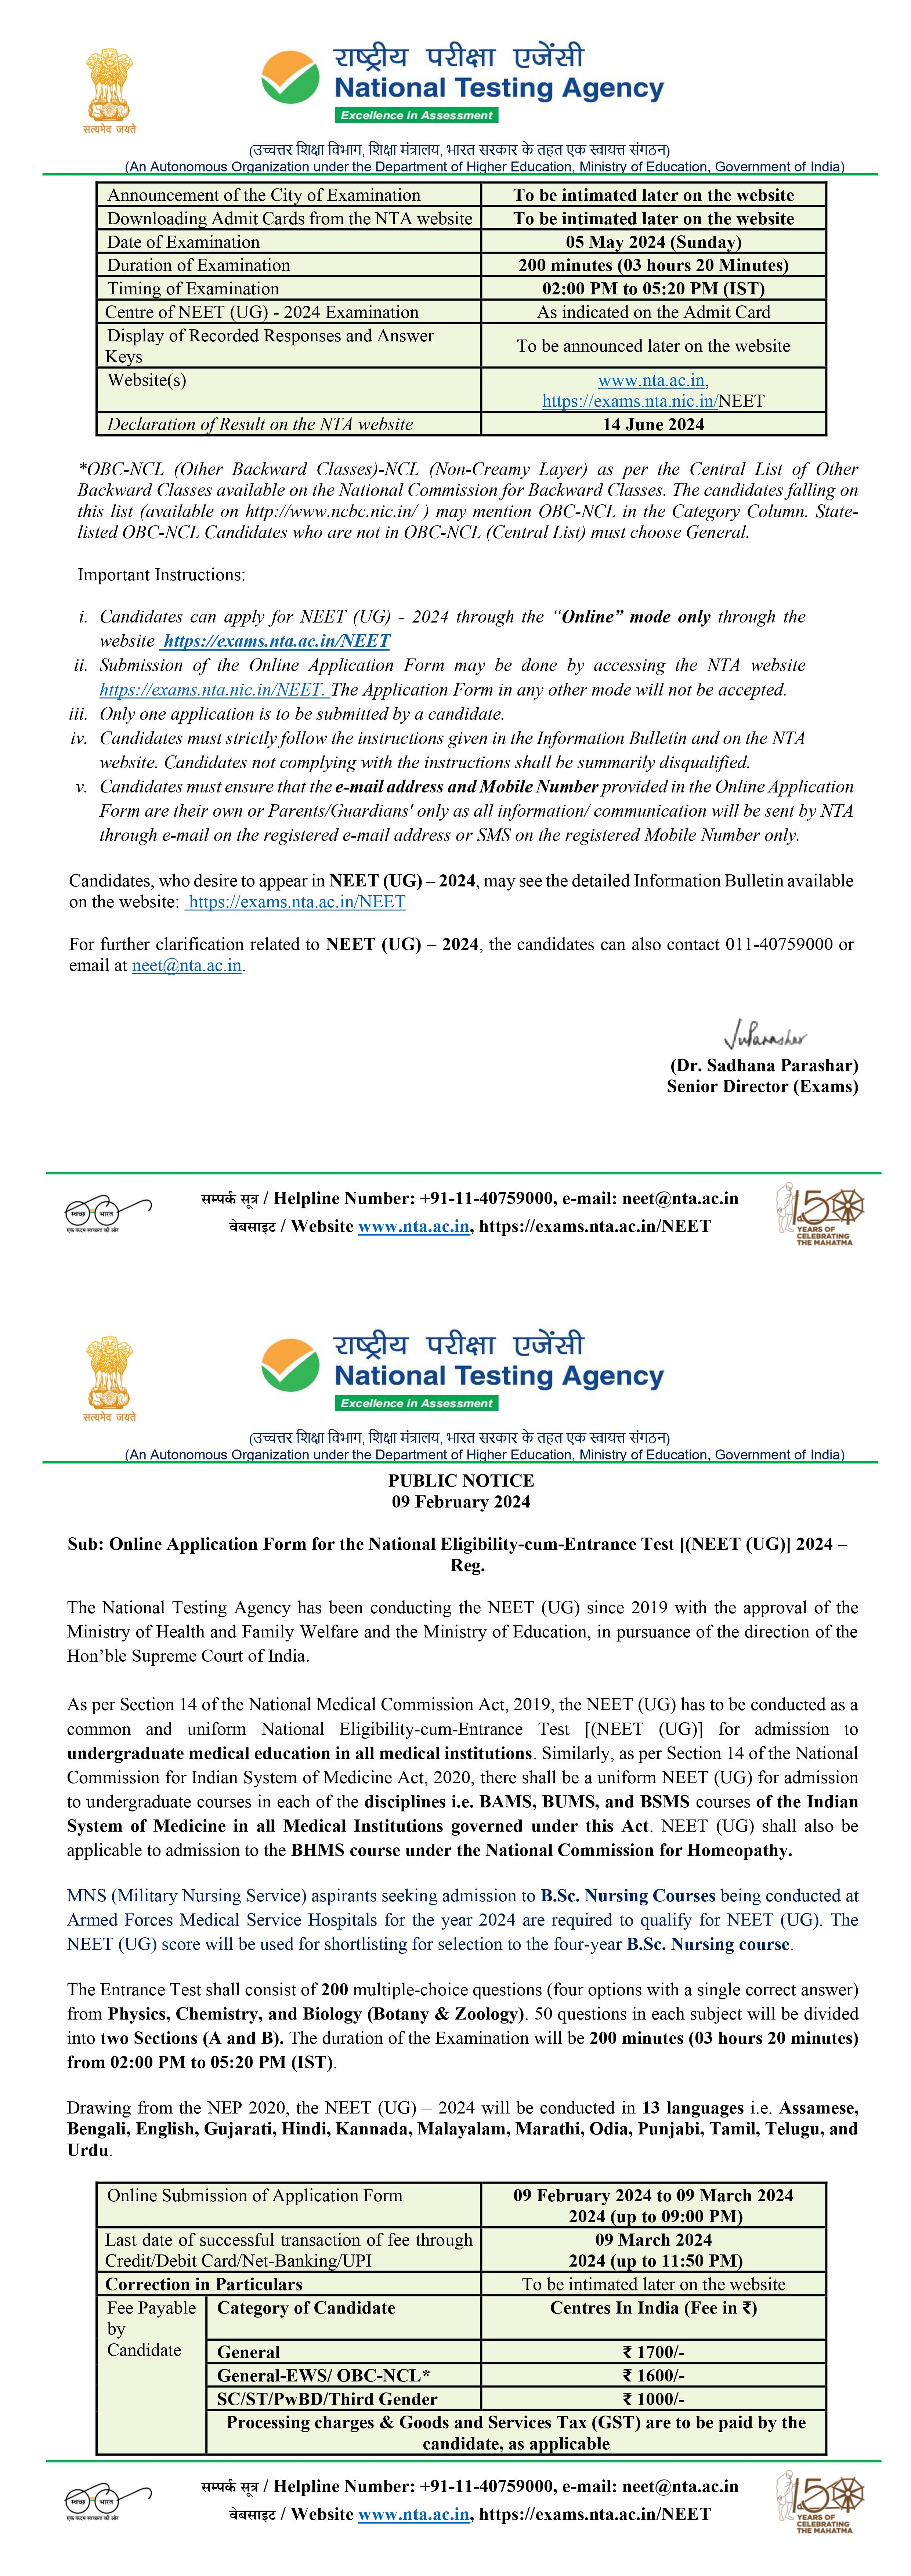 Online Application Form for the National Eligibility-cum-Entrance Test [(NEET (UG)] 2024